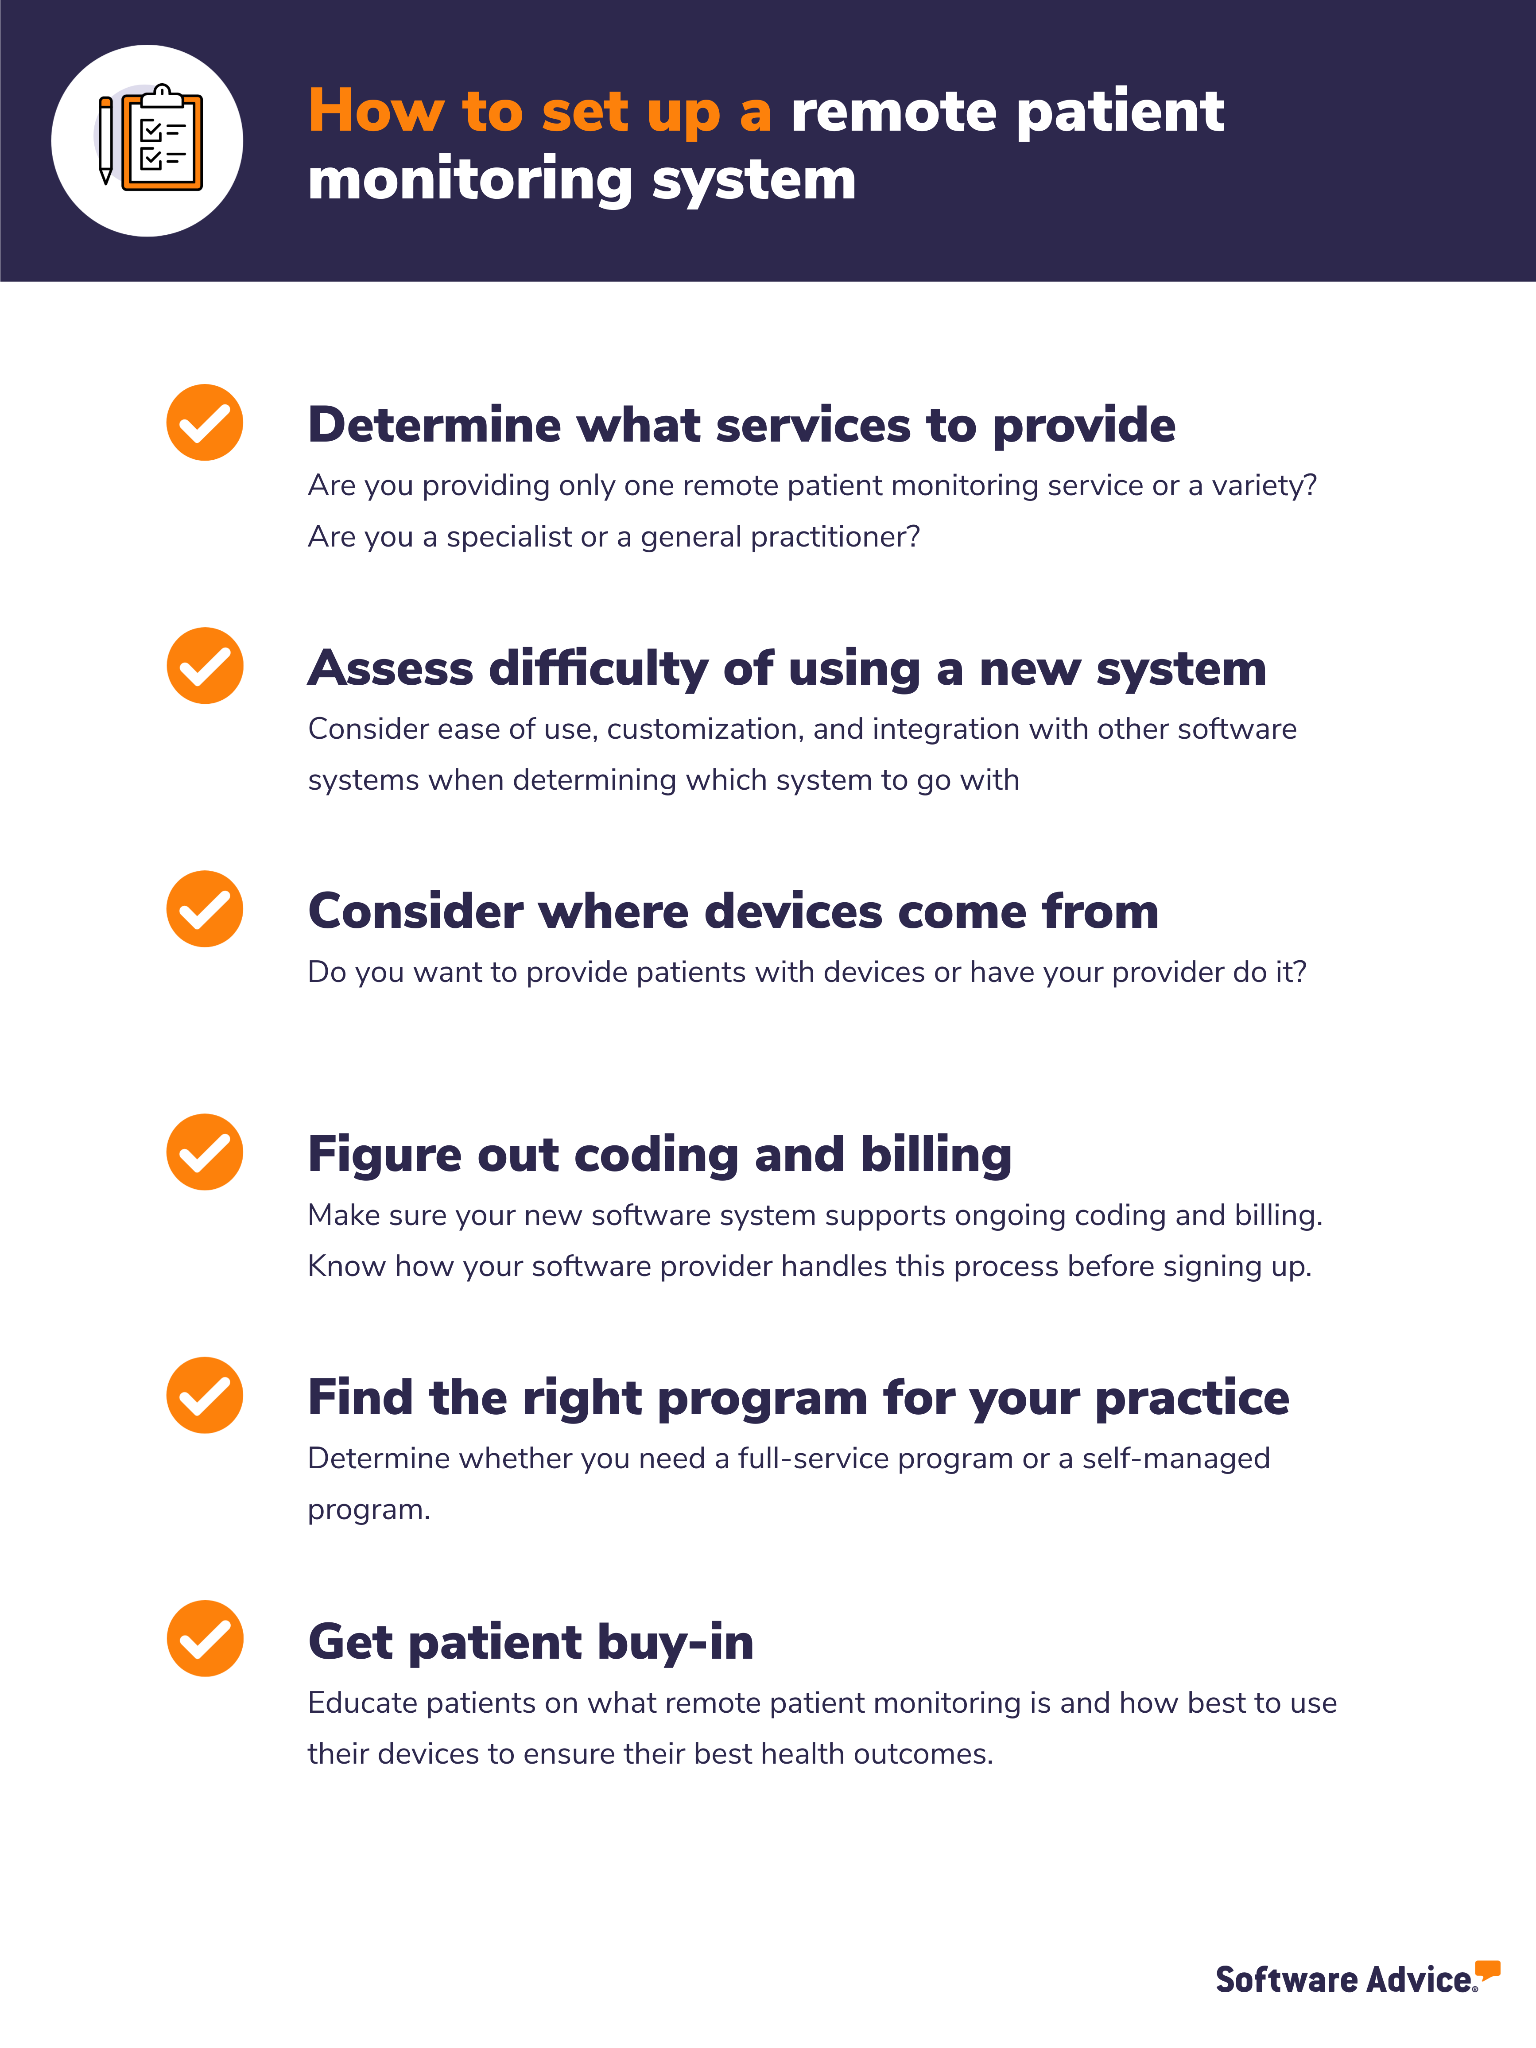 How-to-set-up-a-remote-patient-monitoring-system-checklist